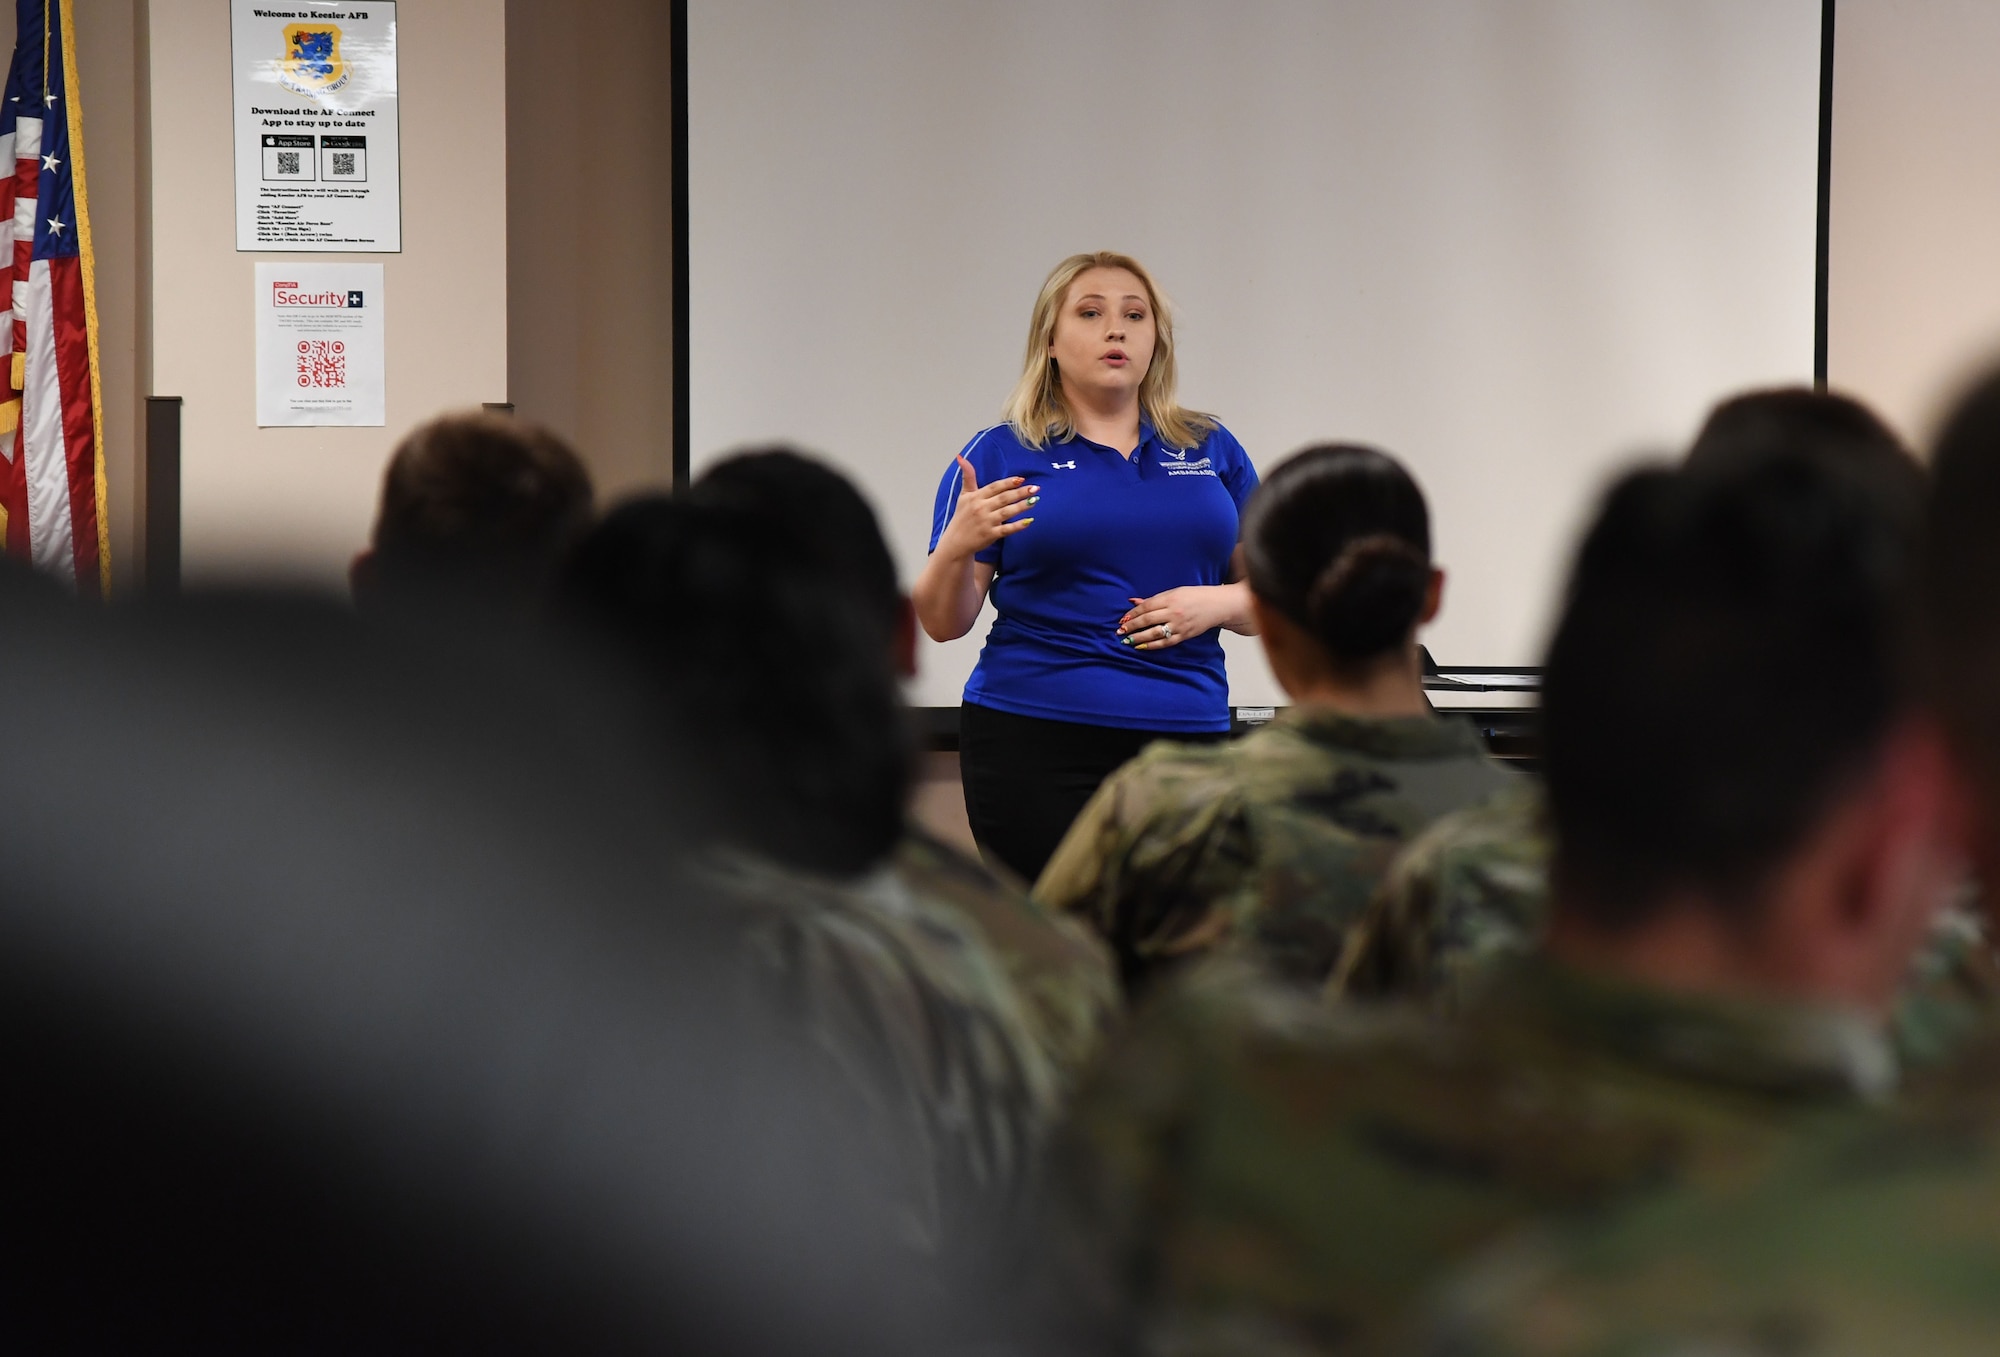 Retired U.S. Air Force Staff Sgt. Laura Flood, Air Force Wounded Warrior (AFW2) program ambassador, tells her story to students from the 336th Training Squadron inside Holbrook Manor at Keesler Air Force Base, Mississippi, June 7, 2022. The AFW2 program provides concentrated non-medical care and support for combat wounded, ill and injured Airmen and their families as they recover and transition back to duty or into civilian life. (U.S. Air Force photo by Kemberly Groue)